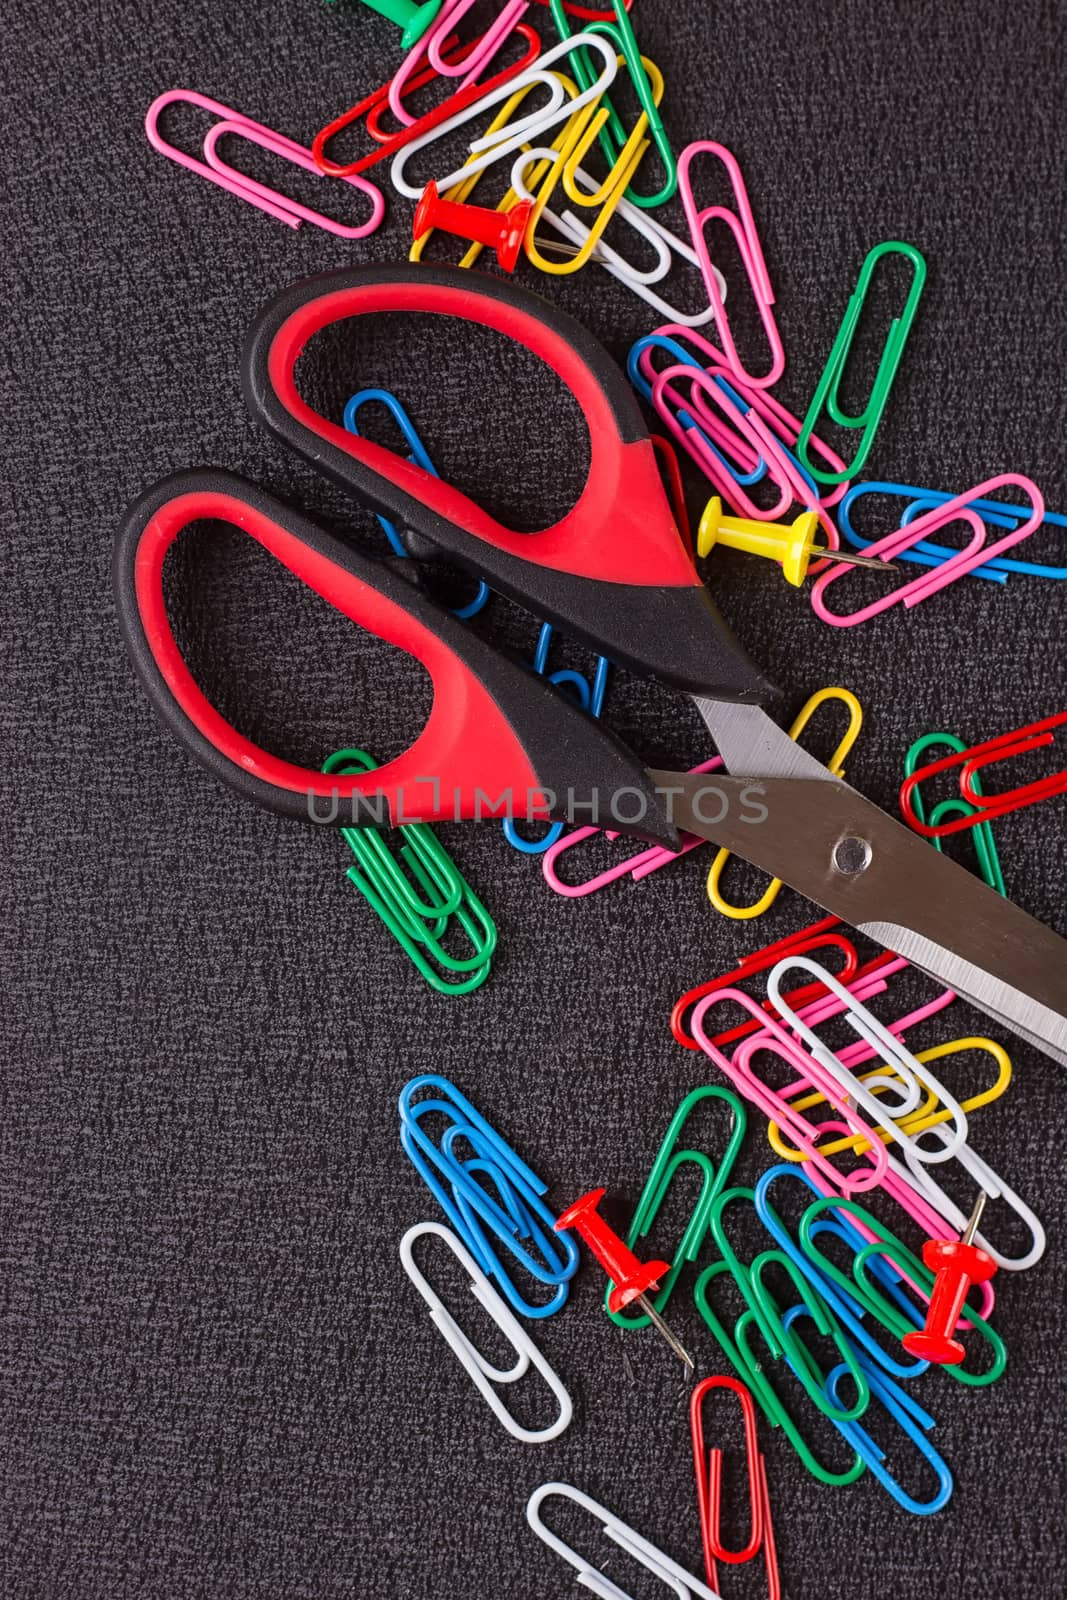 Scissors and paper clips by victosha